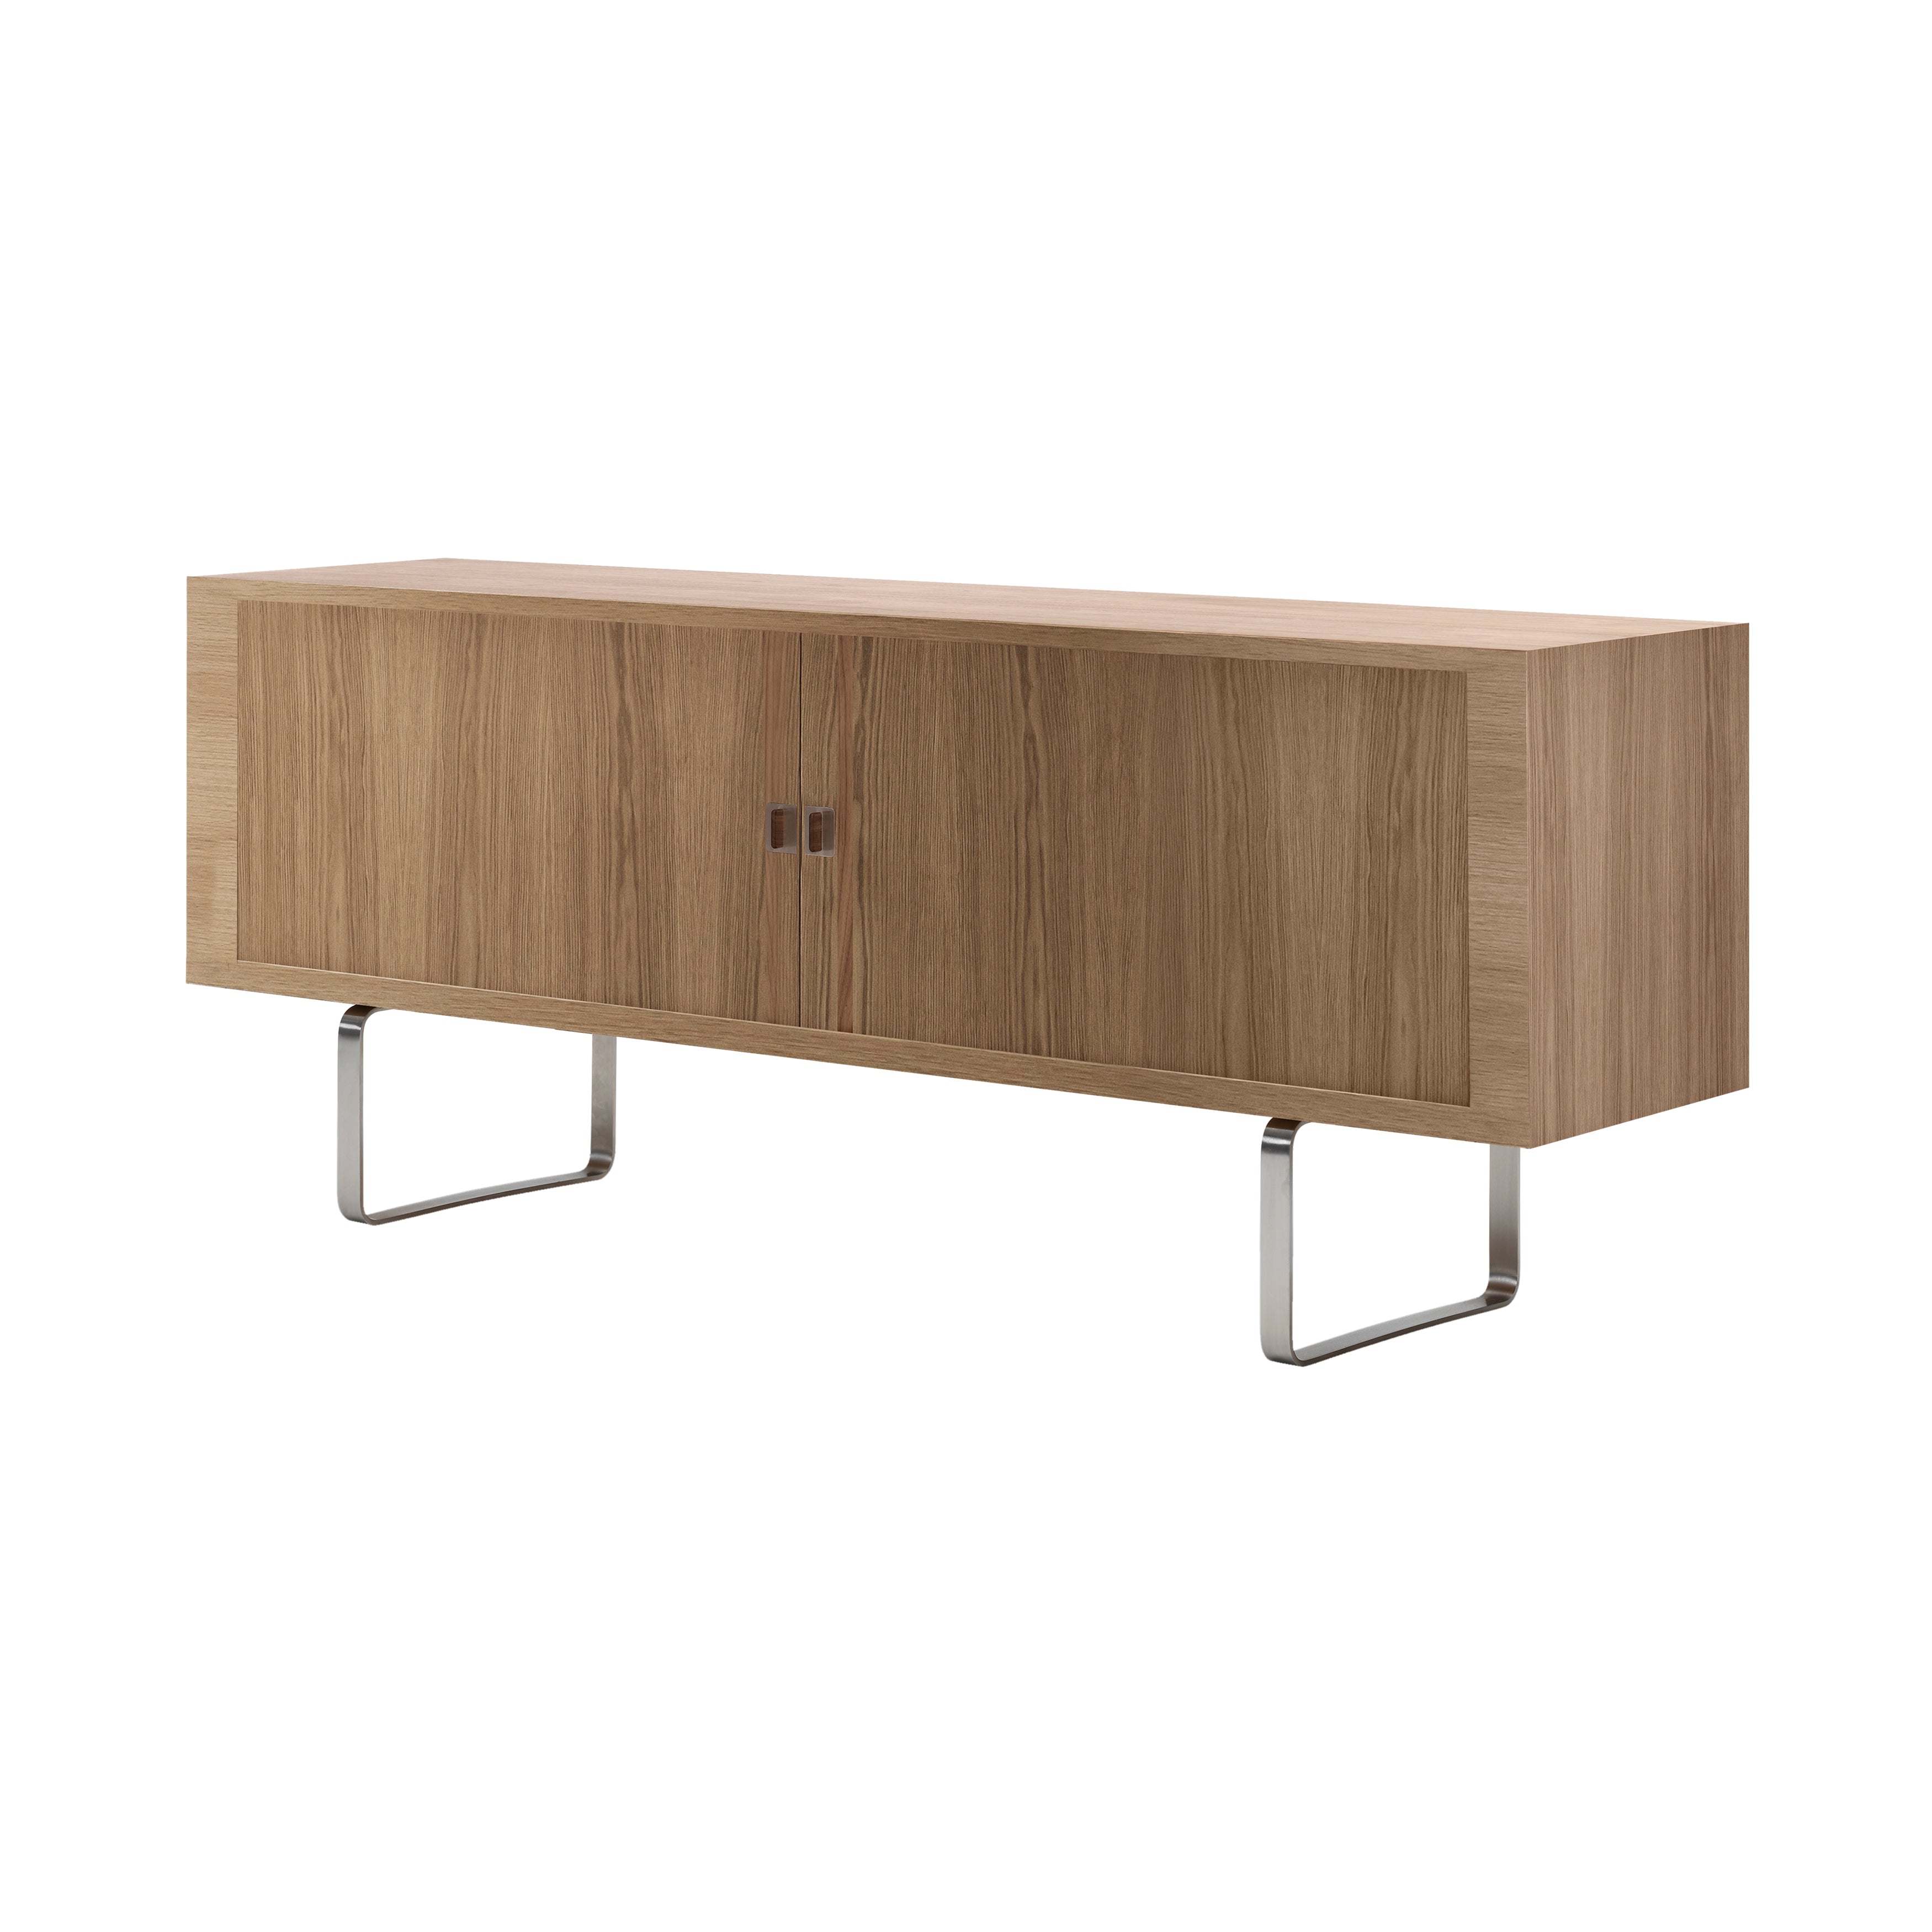 CH825 Credenza: Sled Base + Oiled Oak + Stainless Steel